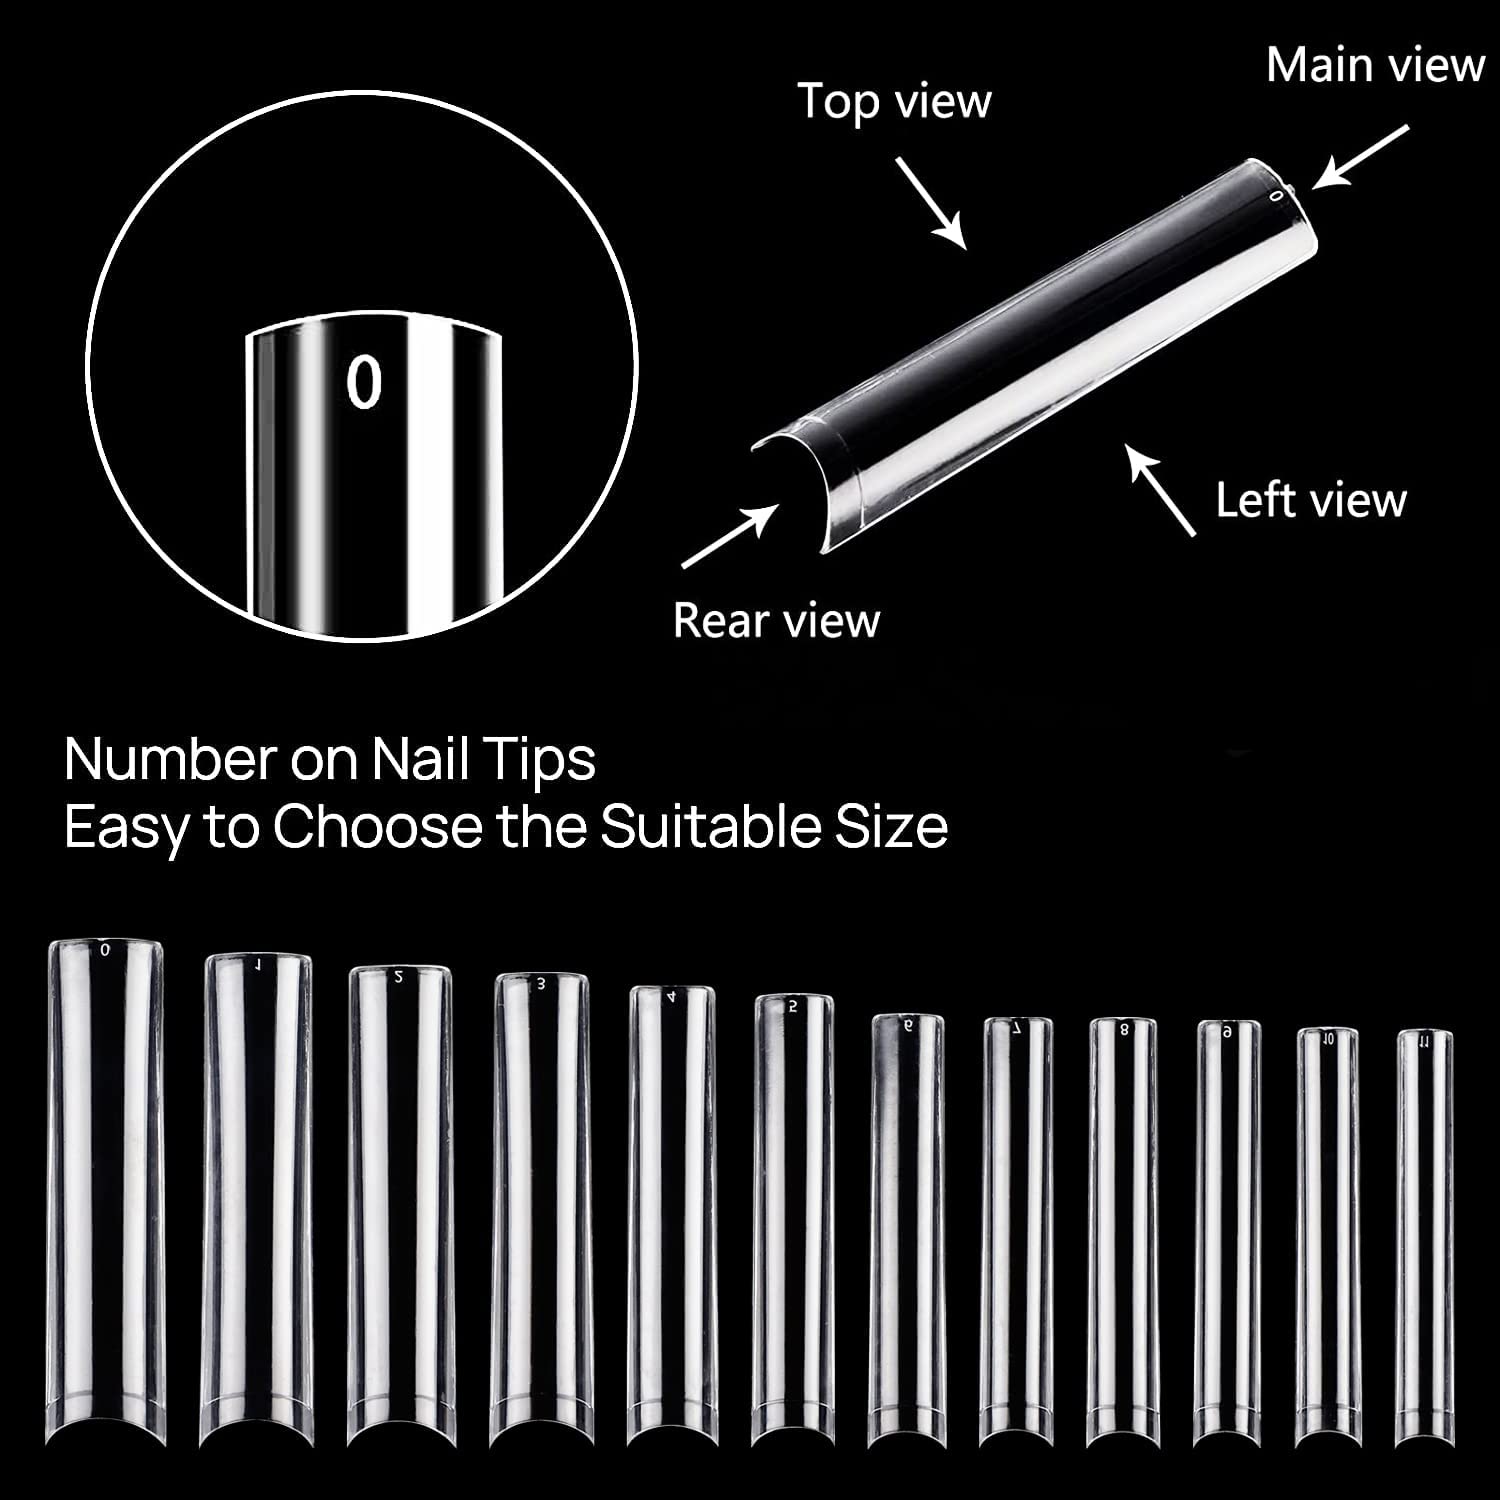 SUPER Long Square Tips/ flat C curve (Long No C Curve Straight Square Nail Tips - Flattened XXXL None Curve Fake Nail Tips Half Cover Flat Square Nails Tips Clear )